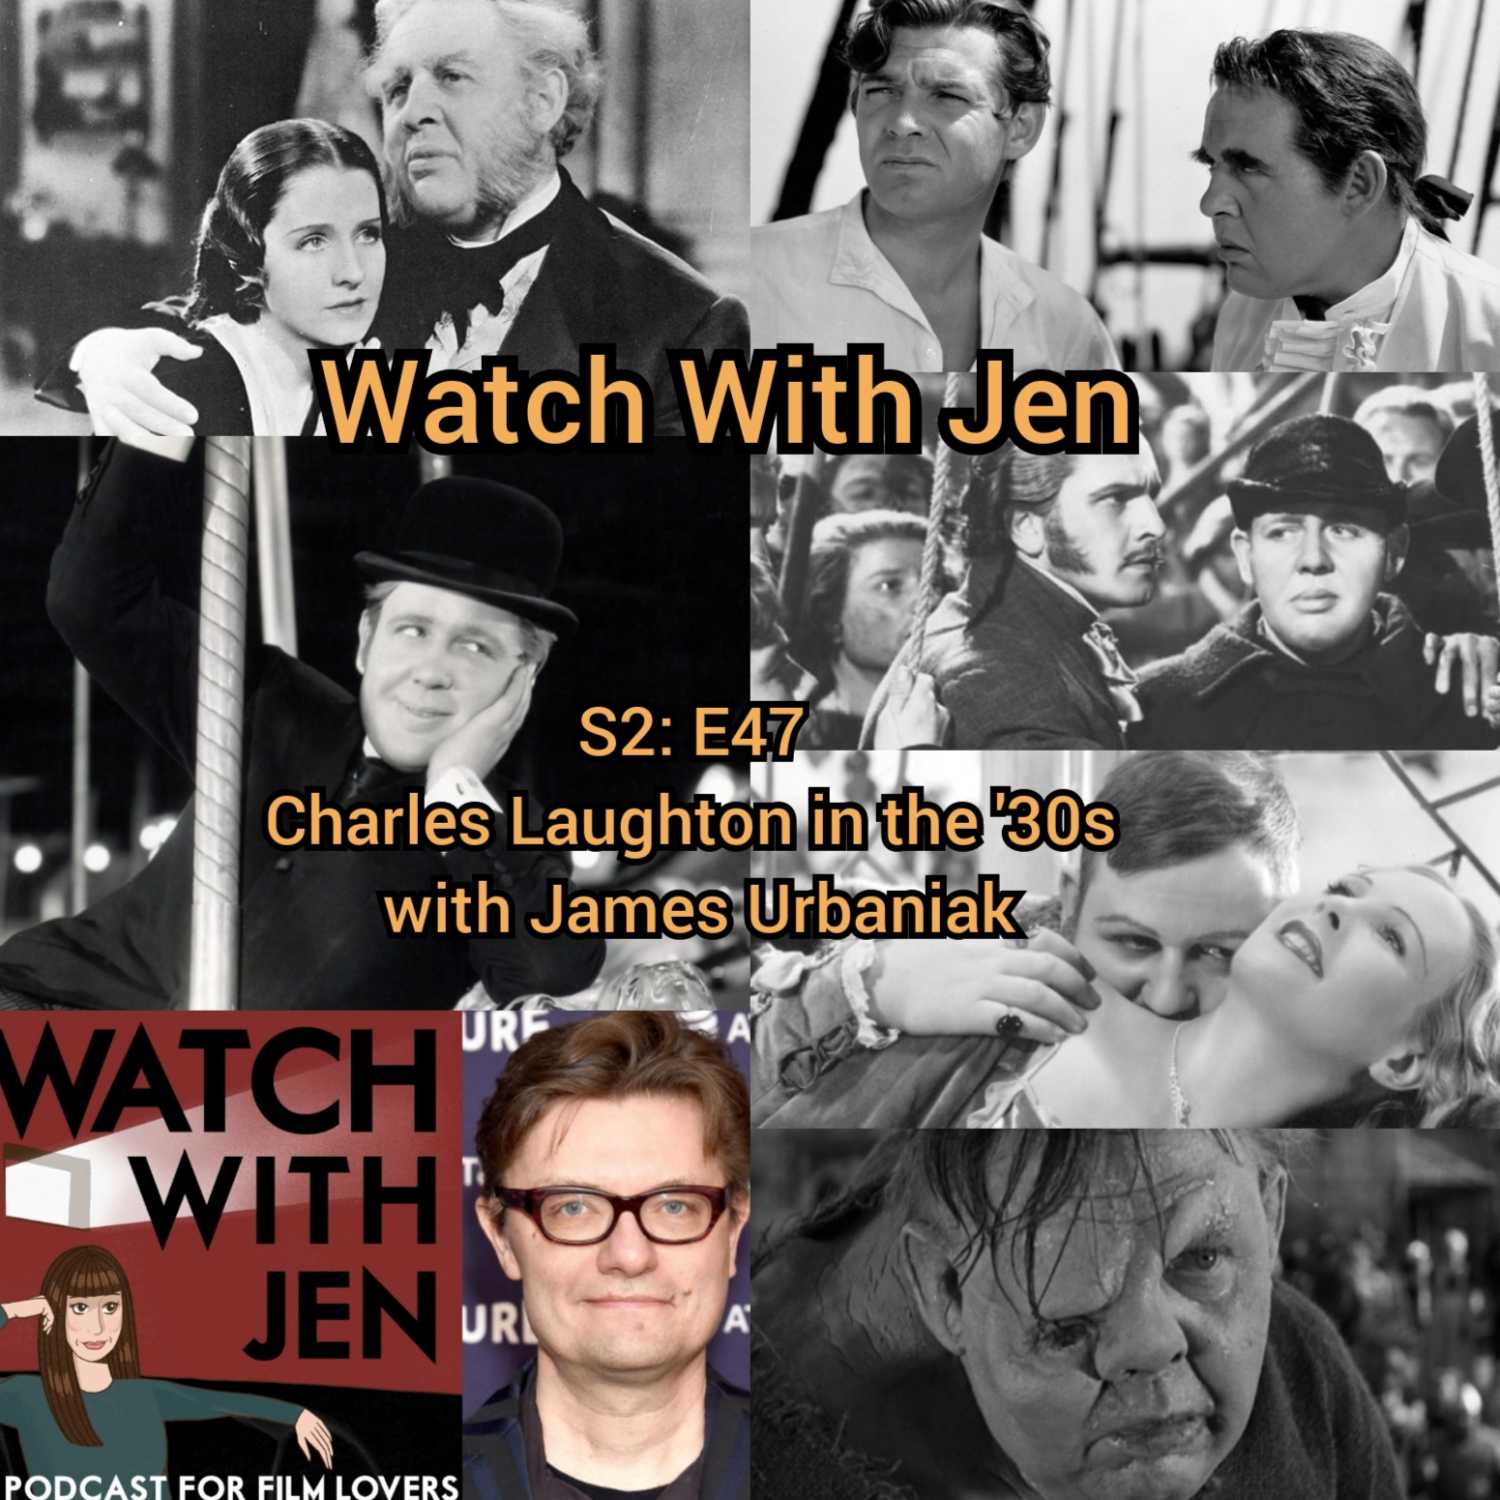 Watch With Jen - S2: E47 - Charles Laughton in the '30s with James Urbaniak